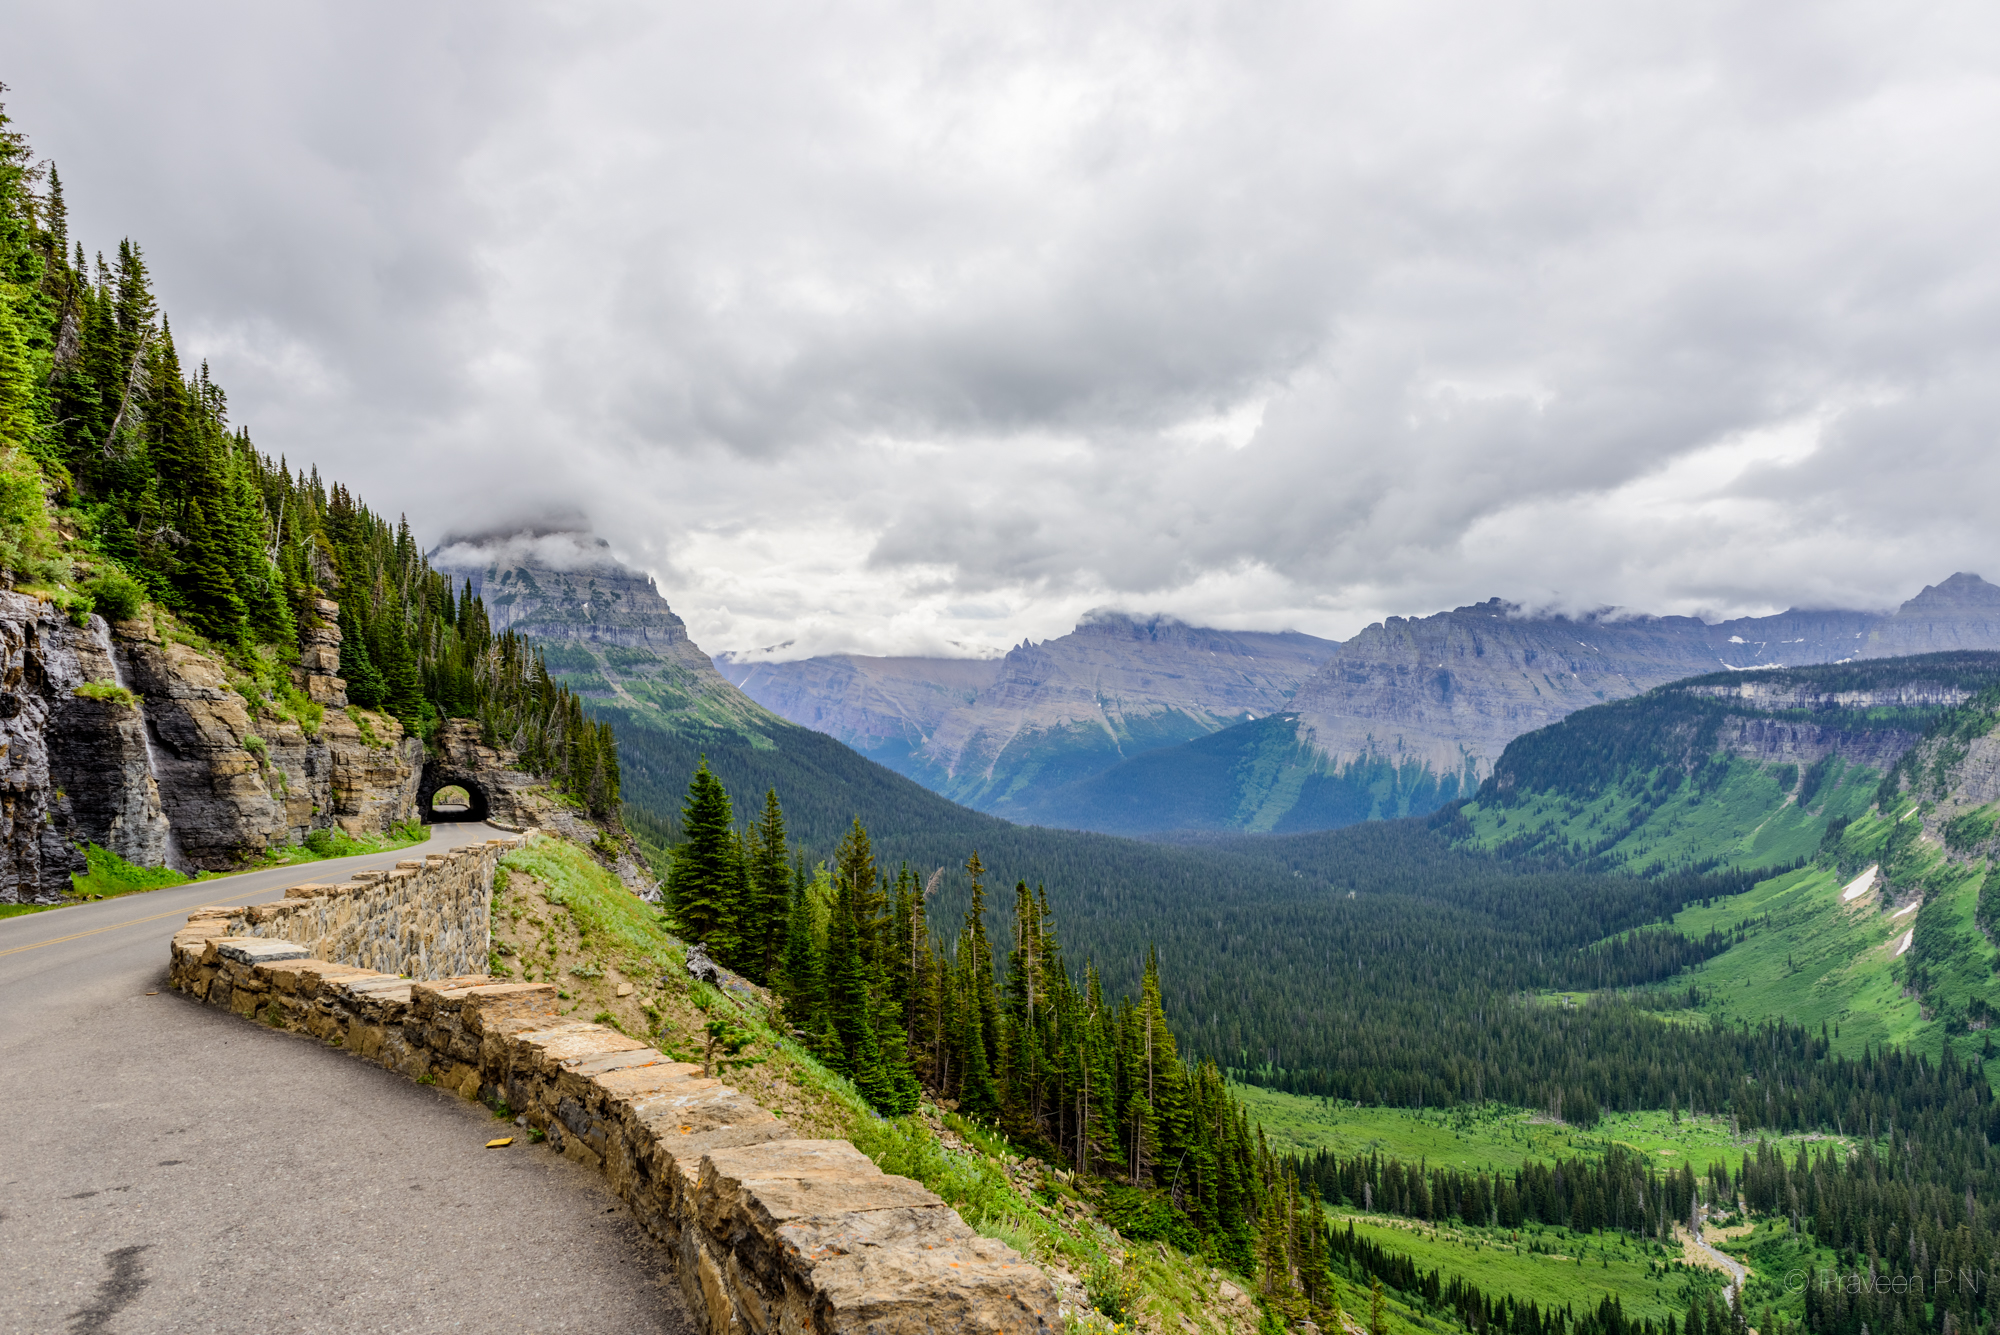 Going-to-the-Sun road